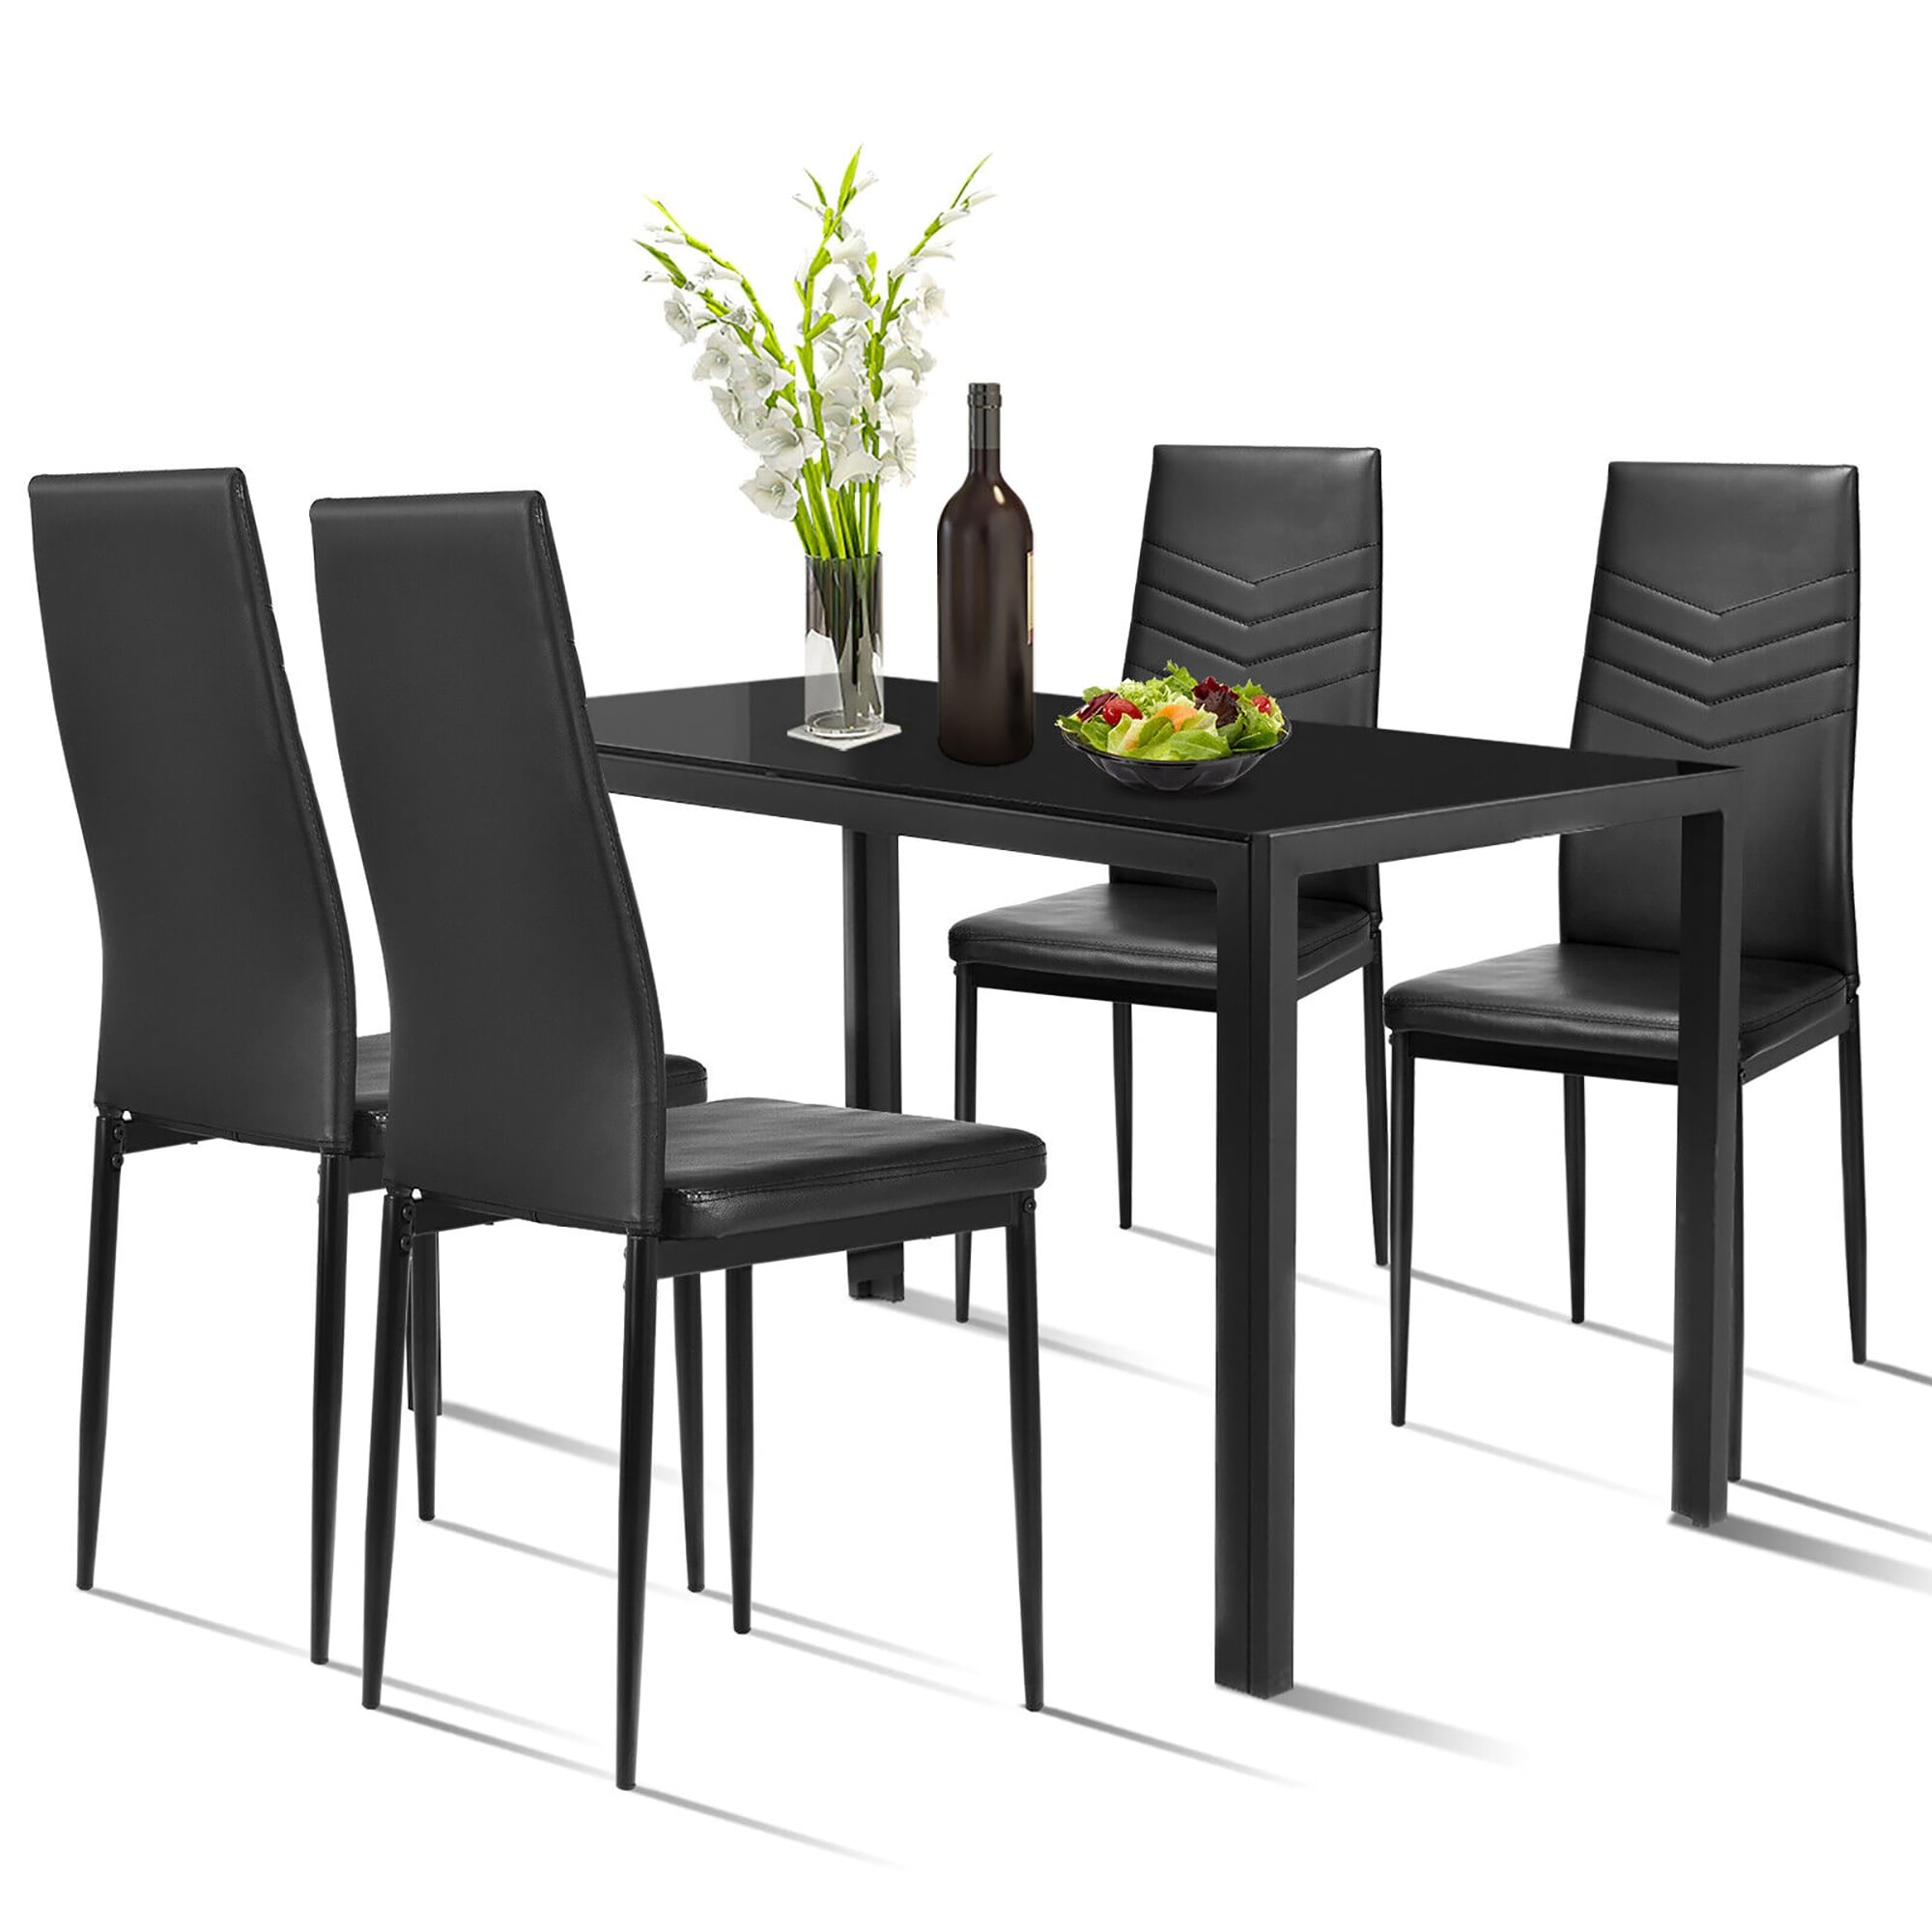 Gymax 5 Piece Dining Set Glass Top Table & 4 Upholstered Chairs Kitchen Room Furniture